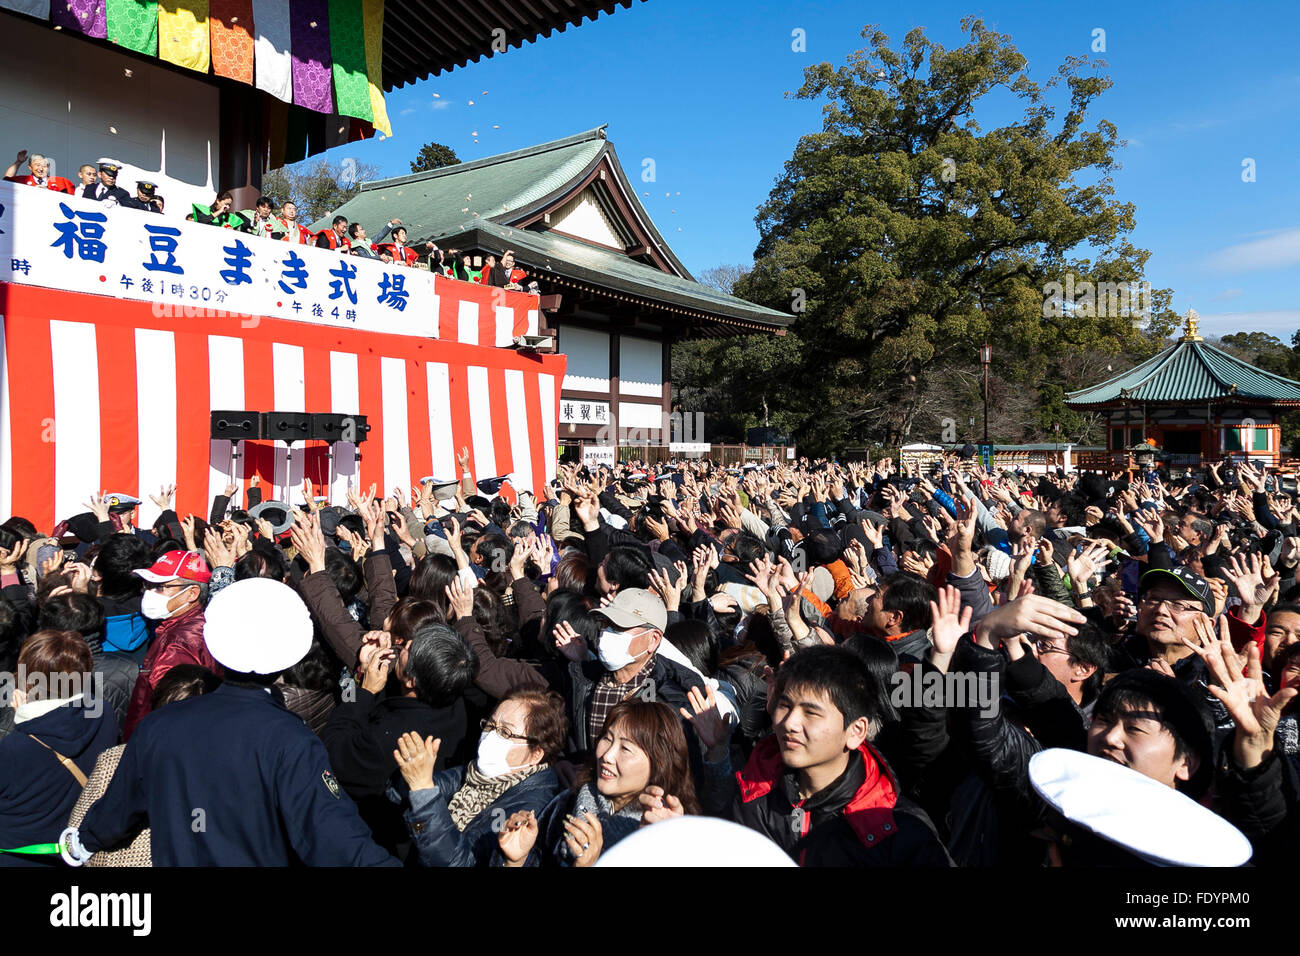 Visitors scramble to collect beans during a Setsubun festival at Naritasan  Shinshoji Temple on February 3, 2016, in Chiba, Japan. Setsubun is an  annual Japanese festival celebrated on February 3rd and marks